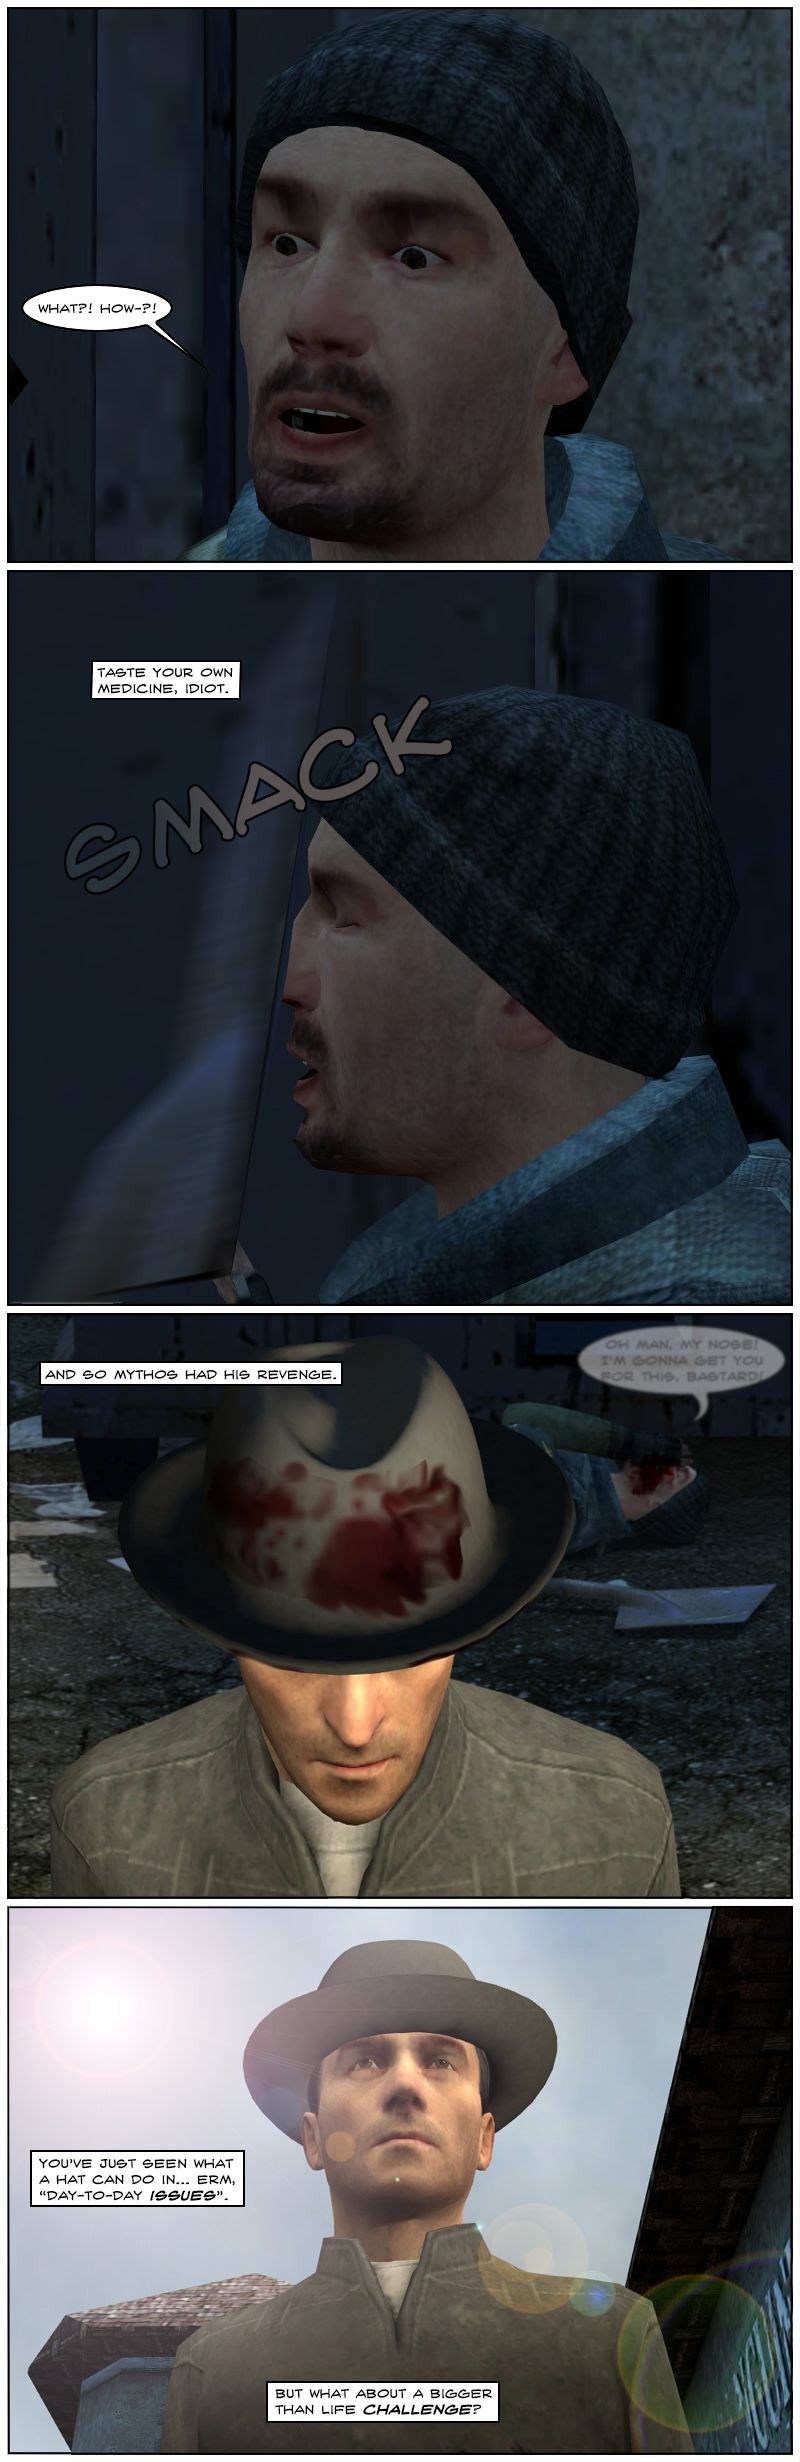 The guy stares in shock and asks what, how, then gets hit back in the face with the shovel as the narrator tells him taste your own medicine. As the guy falls down bleeding from his nose and cursing Mythos, the latter walks away, having had his revenge. The narrator notes you've just seen what a hat can do in day-to-day issues, but what about a bigger than life challenge.